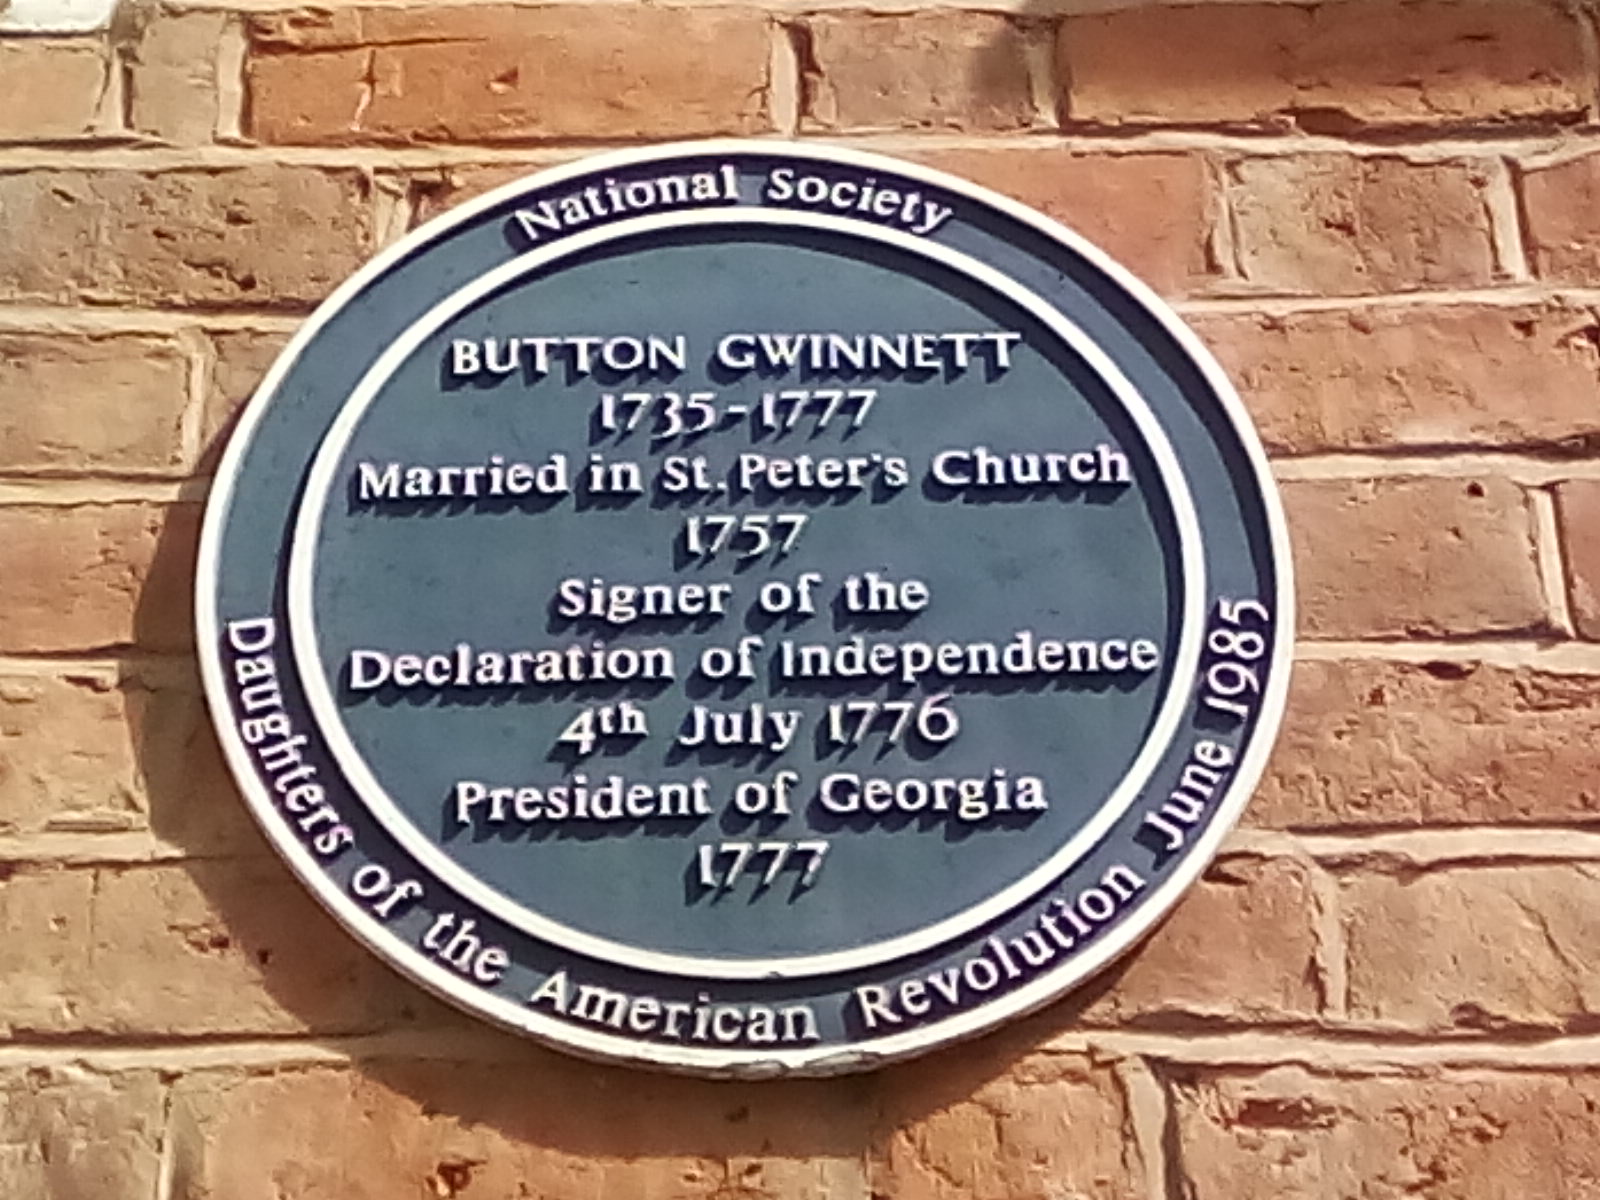 Blue plaque commemorating Button Gwinnett for his signing of the Declaration of Independence